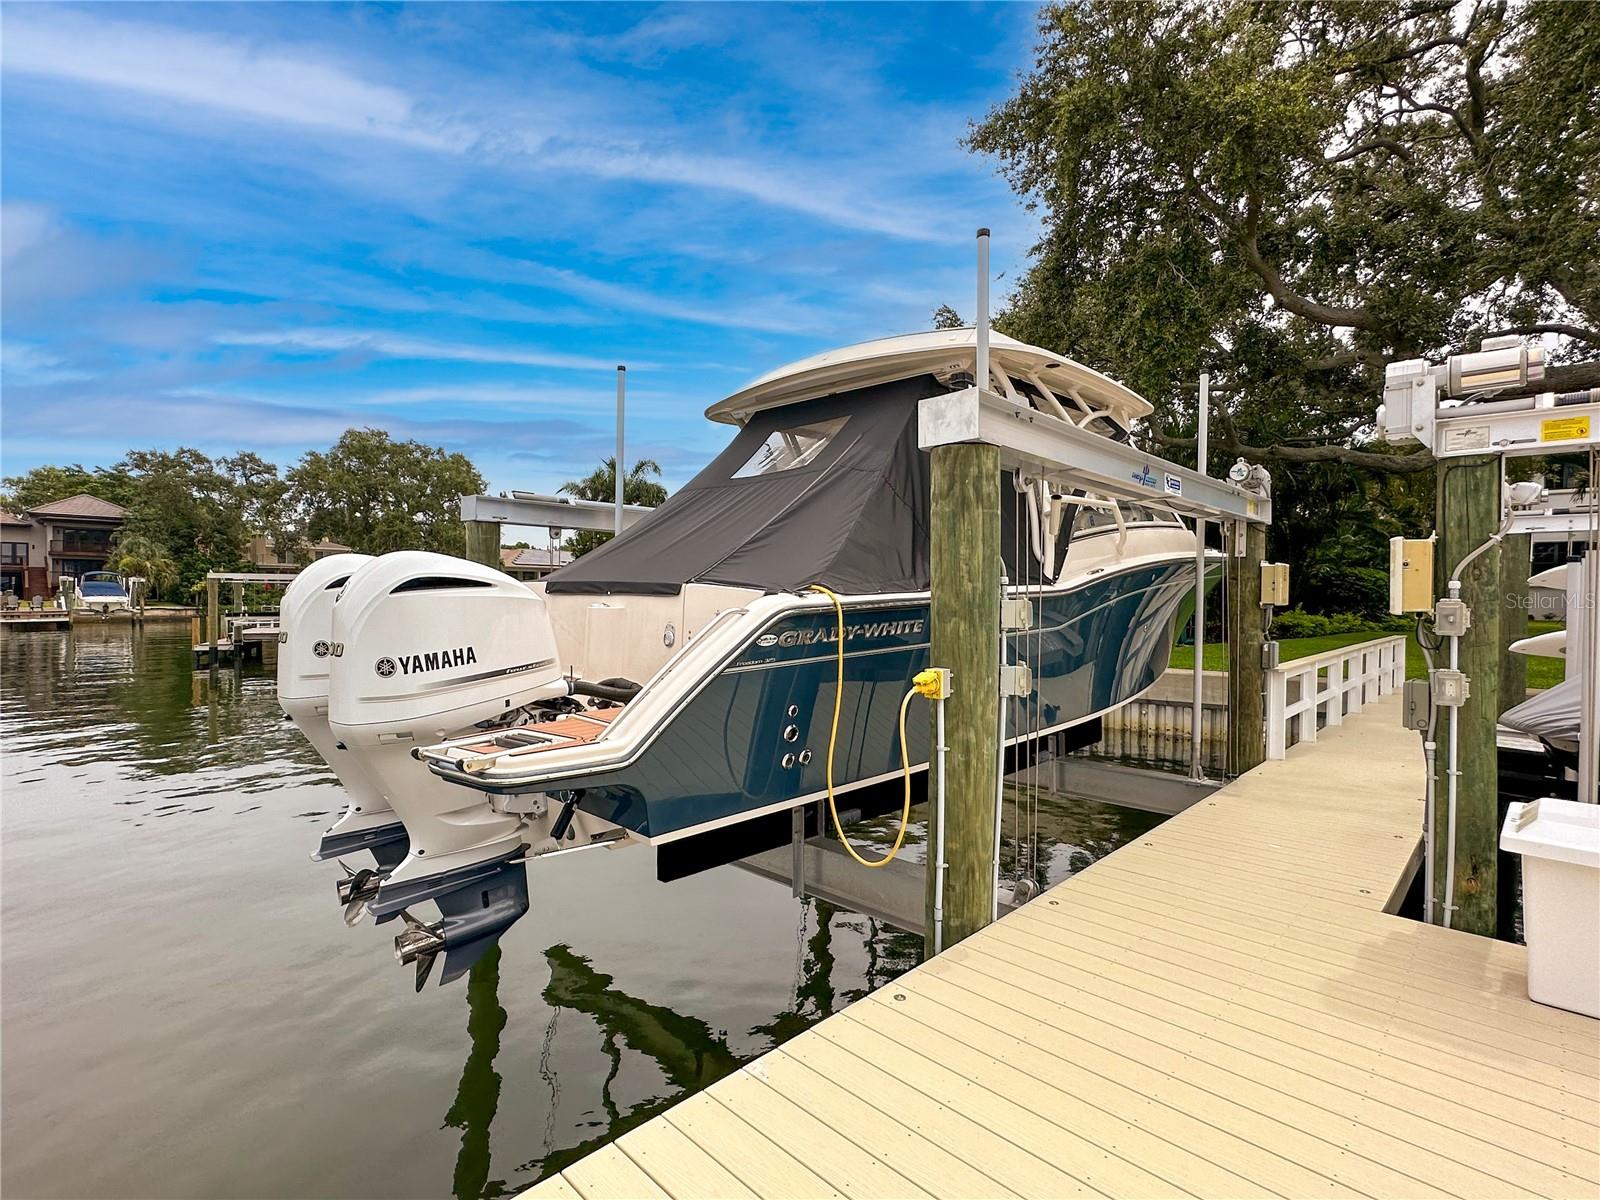 Come see how easy it is to enjoy the open water and a day of boating in Tampa Bay.